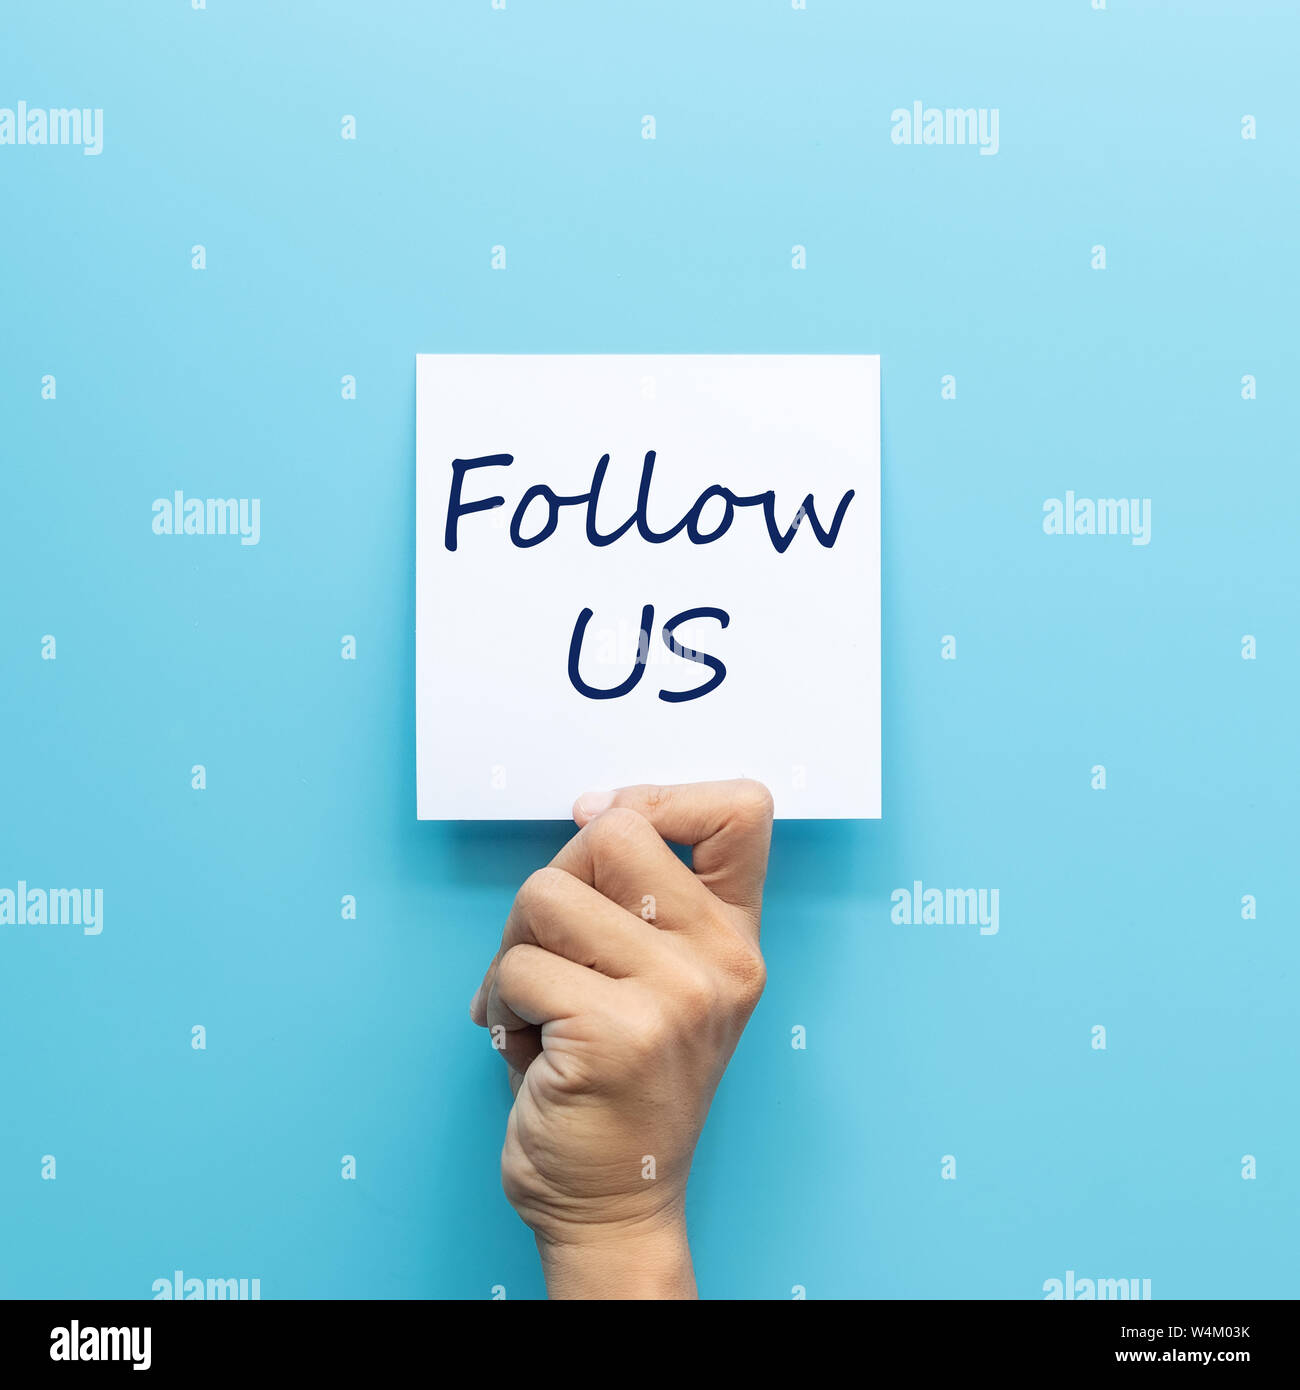 hand holding white paper with text follow us isolated on blue background. social media trend and internet marketing concept Stock Photo